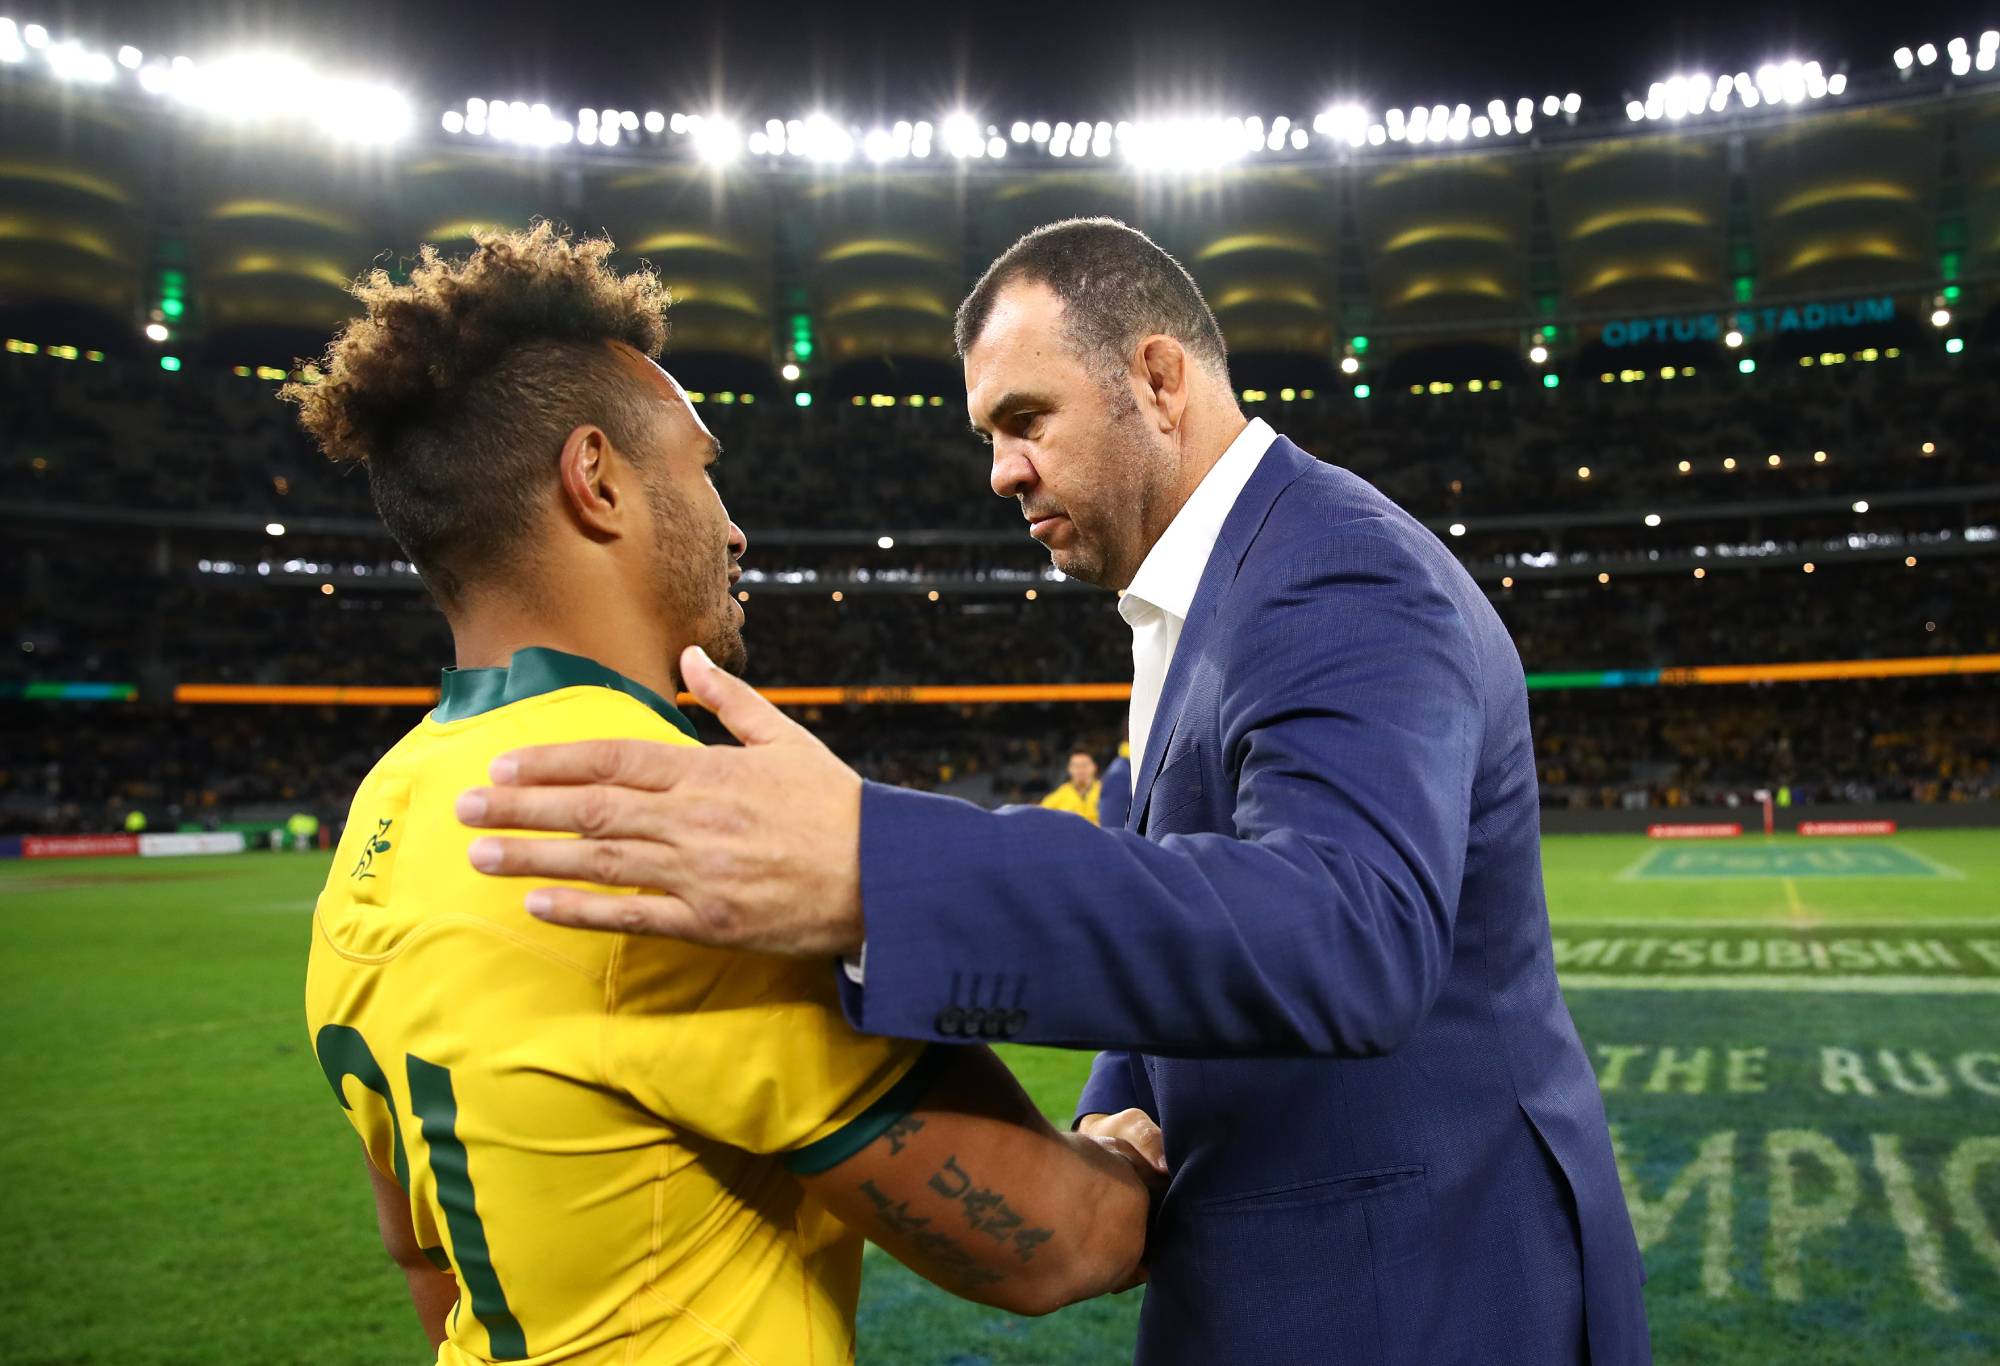 Wallabies coach Michael Cheika congratulates Will Genia of the Wallabies after winning the 2019 Rugby Championship Test Match between the Australian Wallabies and the New Zealand All Blacks at Optus Stadium on August 10, 2019 in Perth, Australia. (Photo by Cameron Spencer/Getty Images)